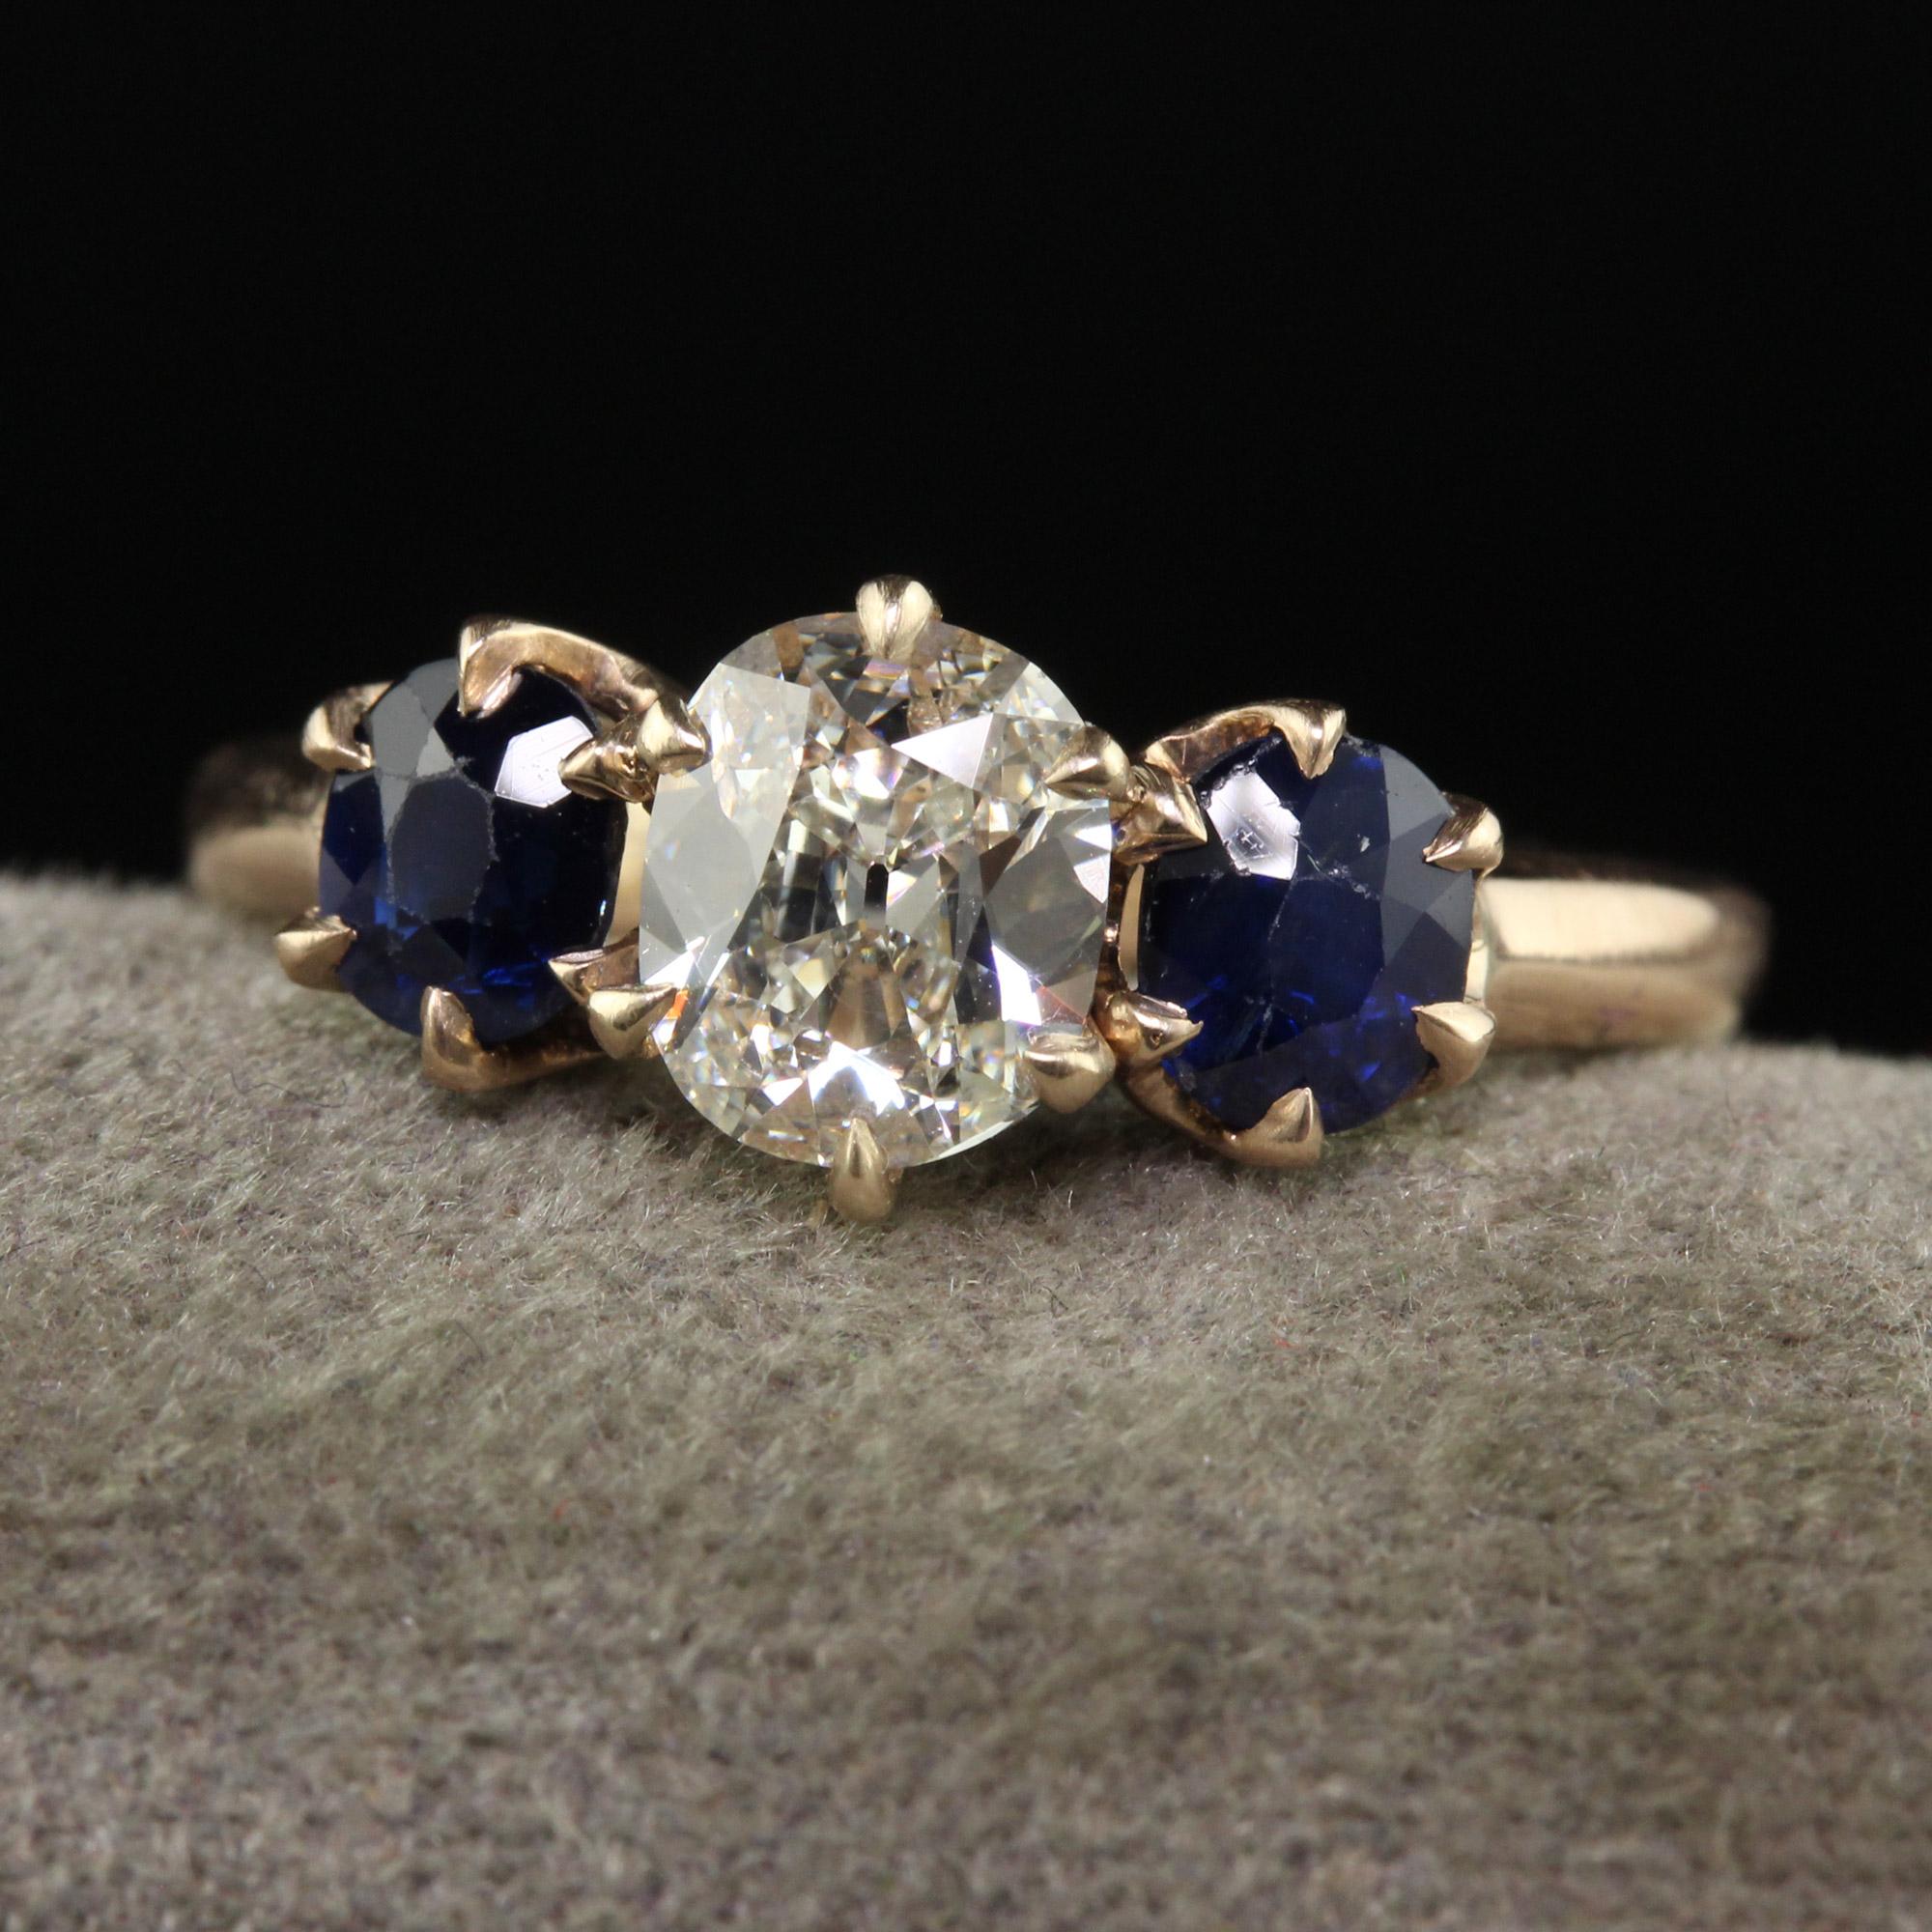 Beautiful Antique Art Deco 14K Yellow Gold Old Cushion Cut Diamond Sapphire Three Stone Ring - GIA. This gorgeous and classic ring is crafted in 14k yellow gold. The center holds a old cushion cut diamond that has a GIA report. The sides are natural